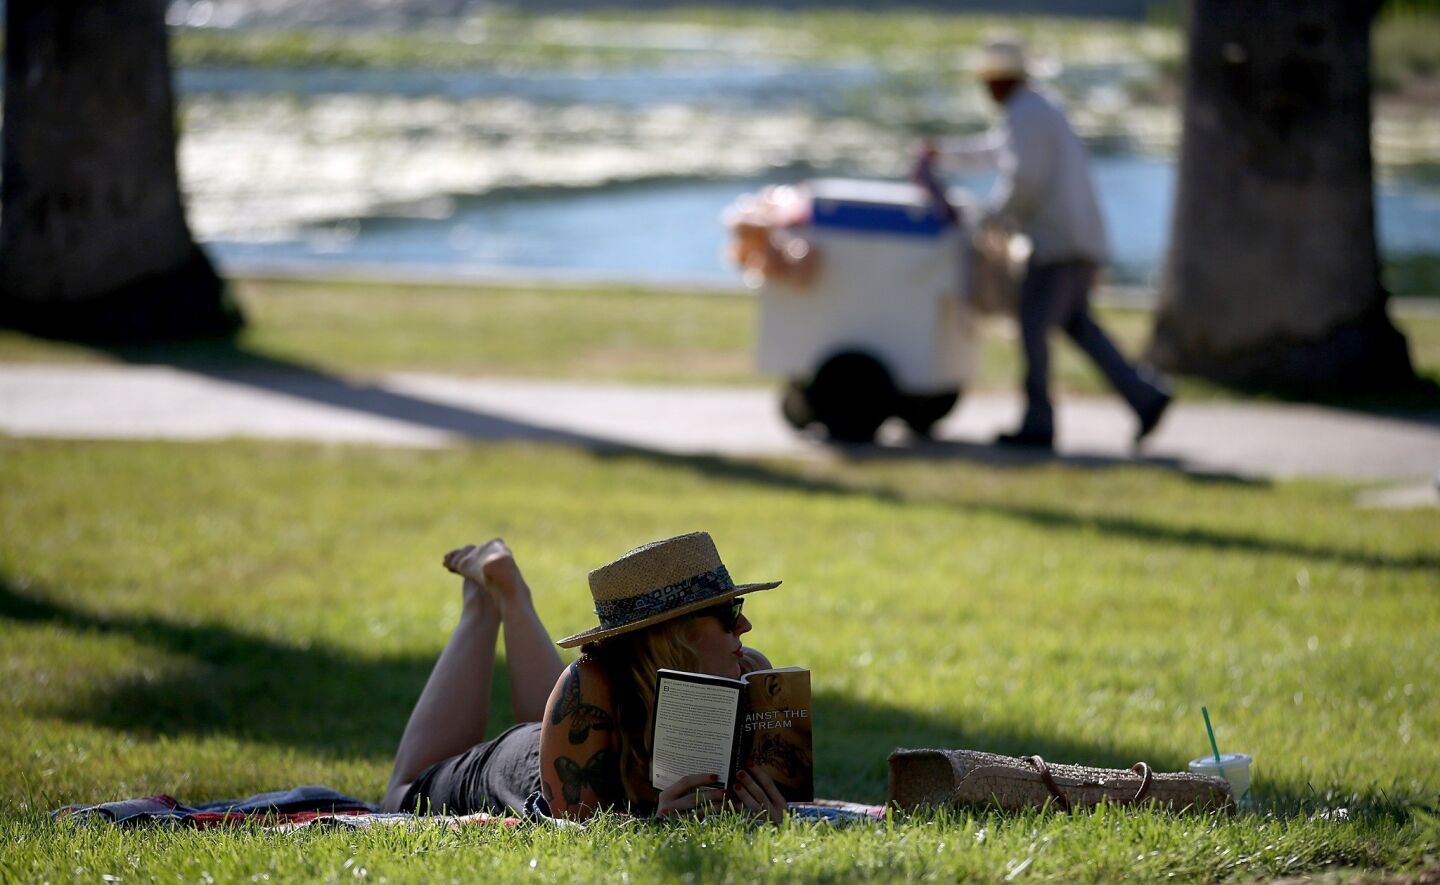 Next to Echo Park Lake, Mishelle Parry reads in the shade as an ice cream vendor walks by.